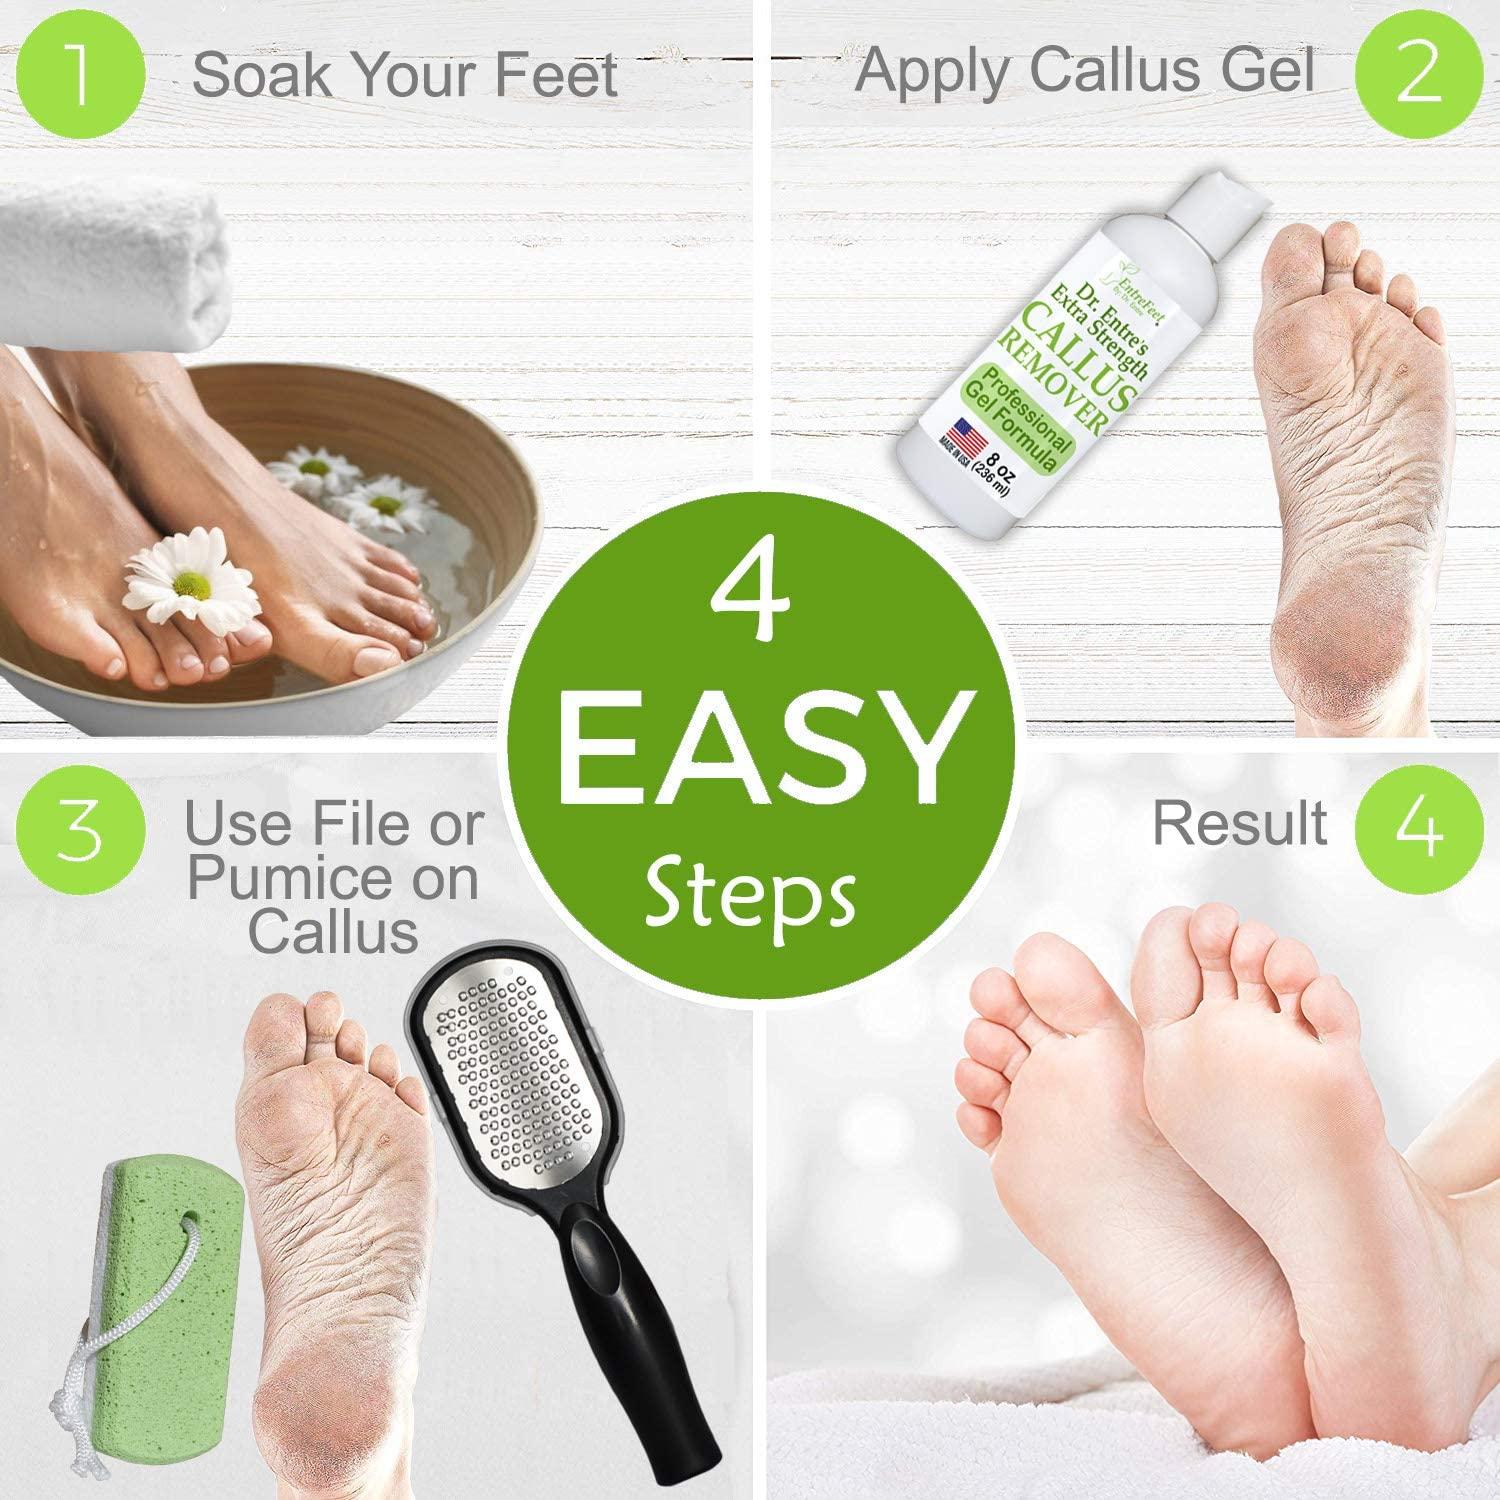 8oz Callus Remover Gel for Feet for A Professional Pedicure. Better